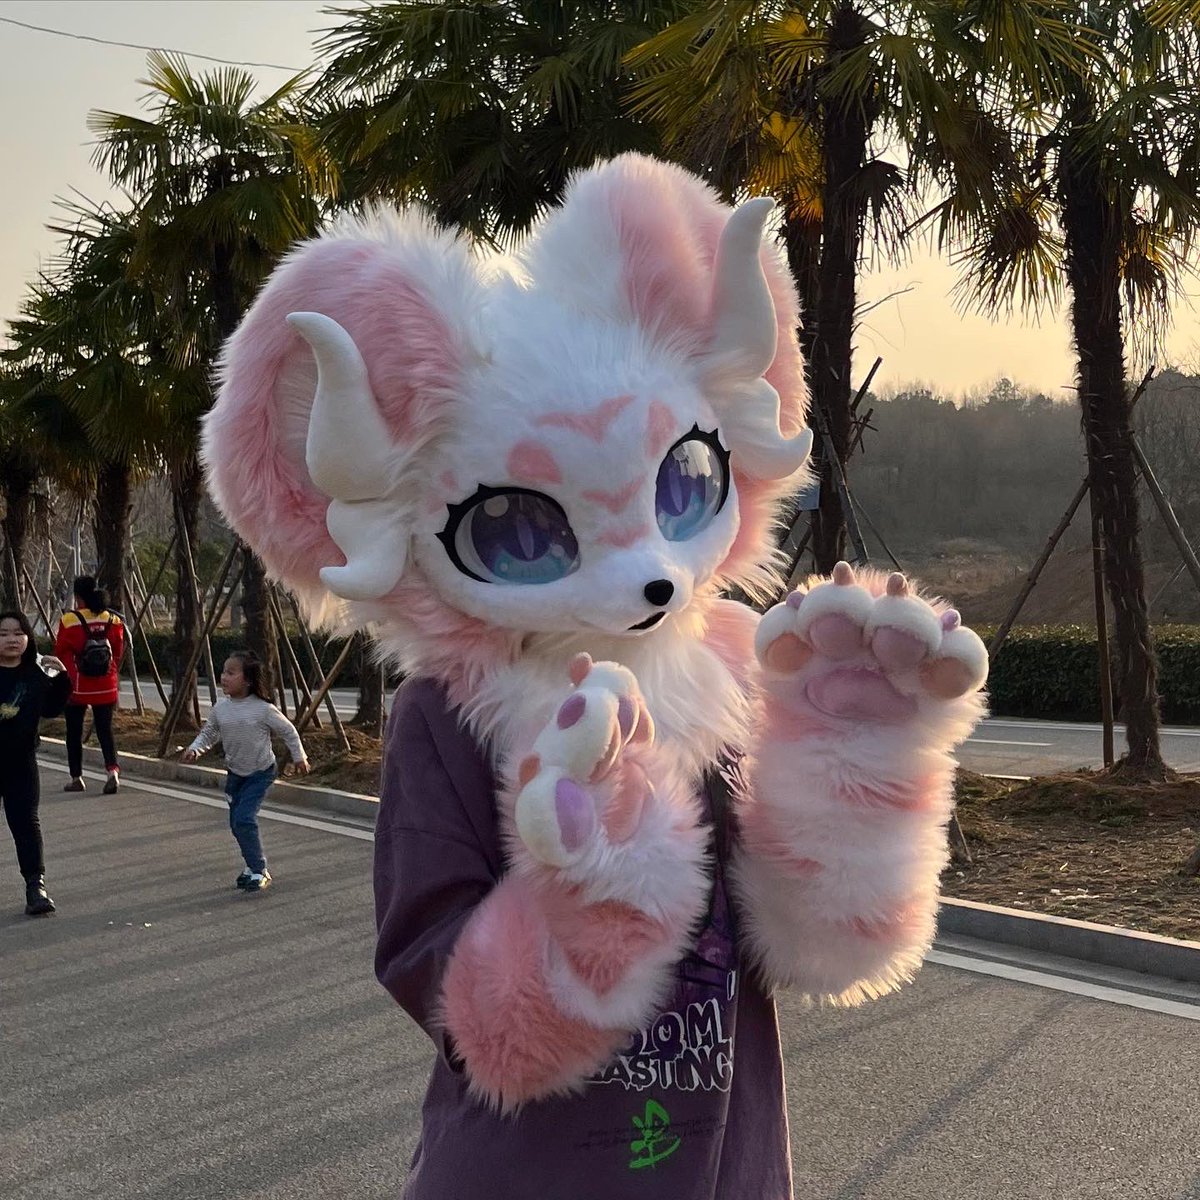 Repo from the owner .
Made by ZL Fursuit Studio.
Furry name:Kanna

#furry #furryfandom #furrycommunity #fursuit #fursuiter #fursuitmaker #fursuting #kemono